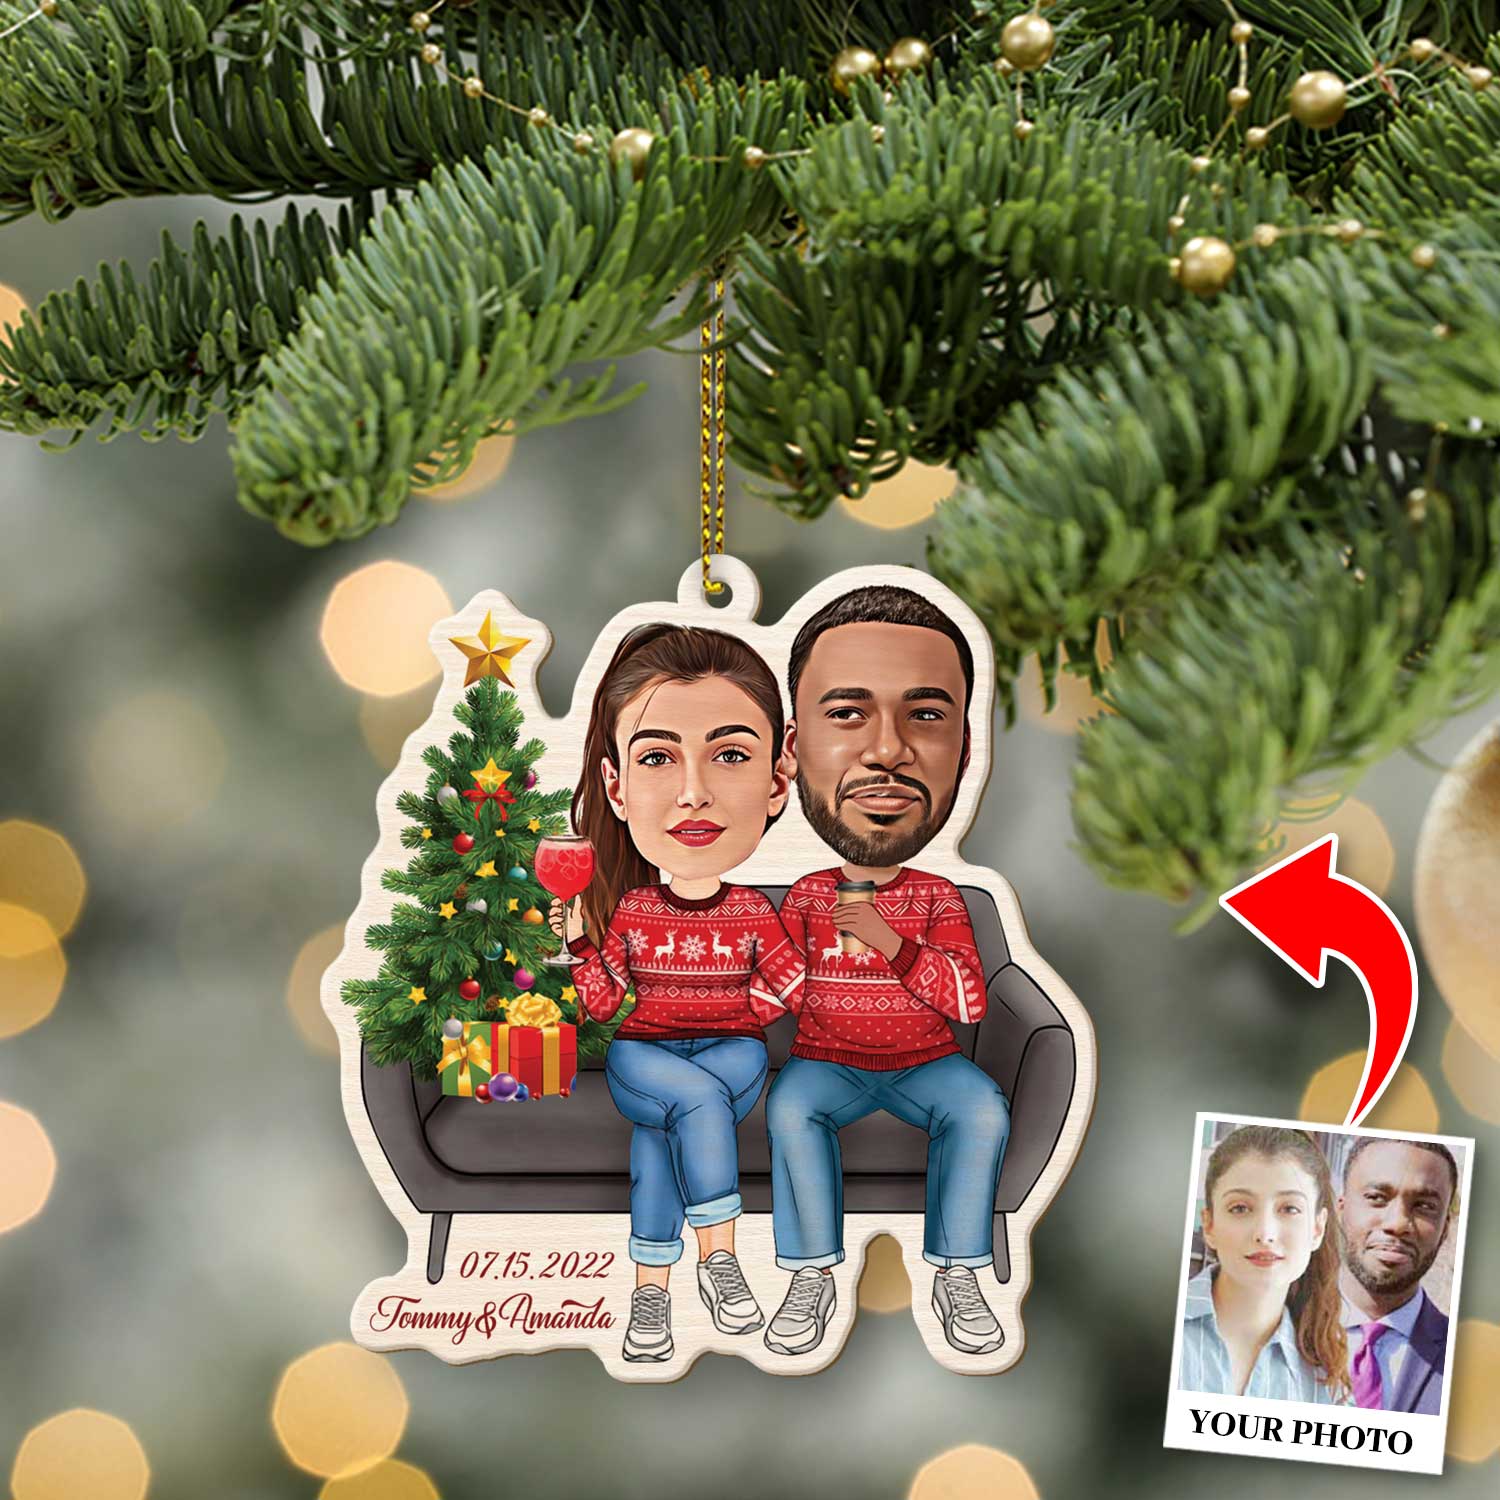 Face From Photo, Gift For Couple, Christmas Couch, Shape Ornament 2 Sides